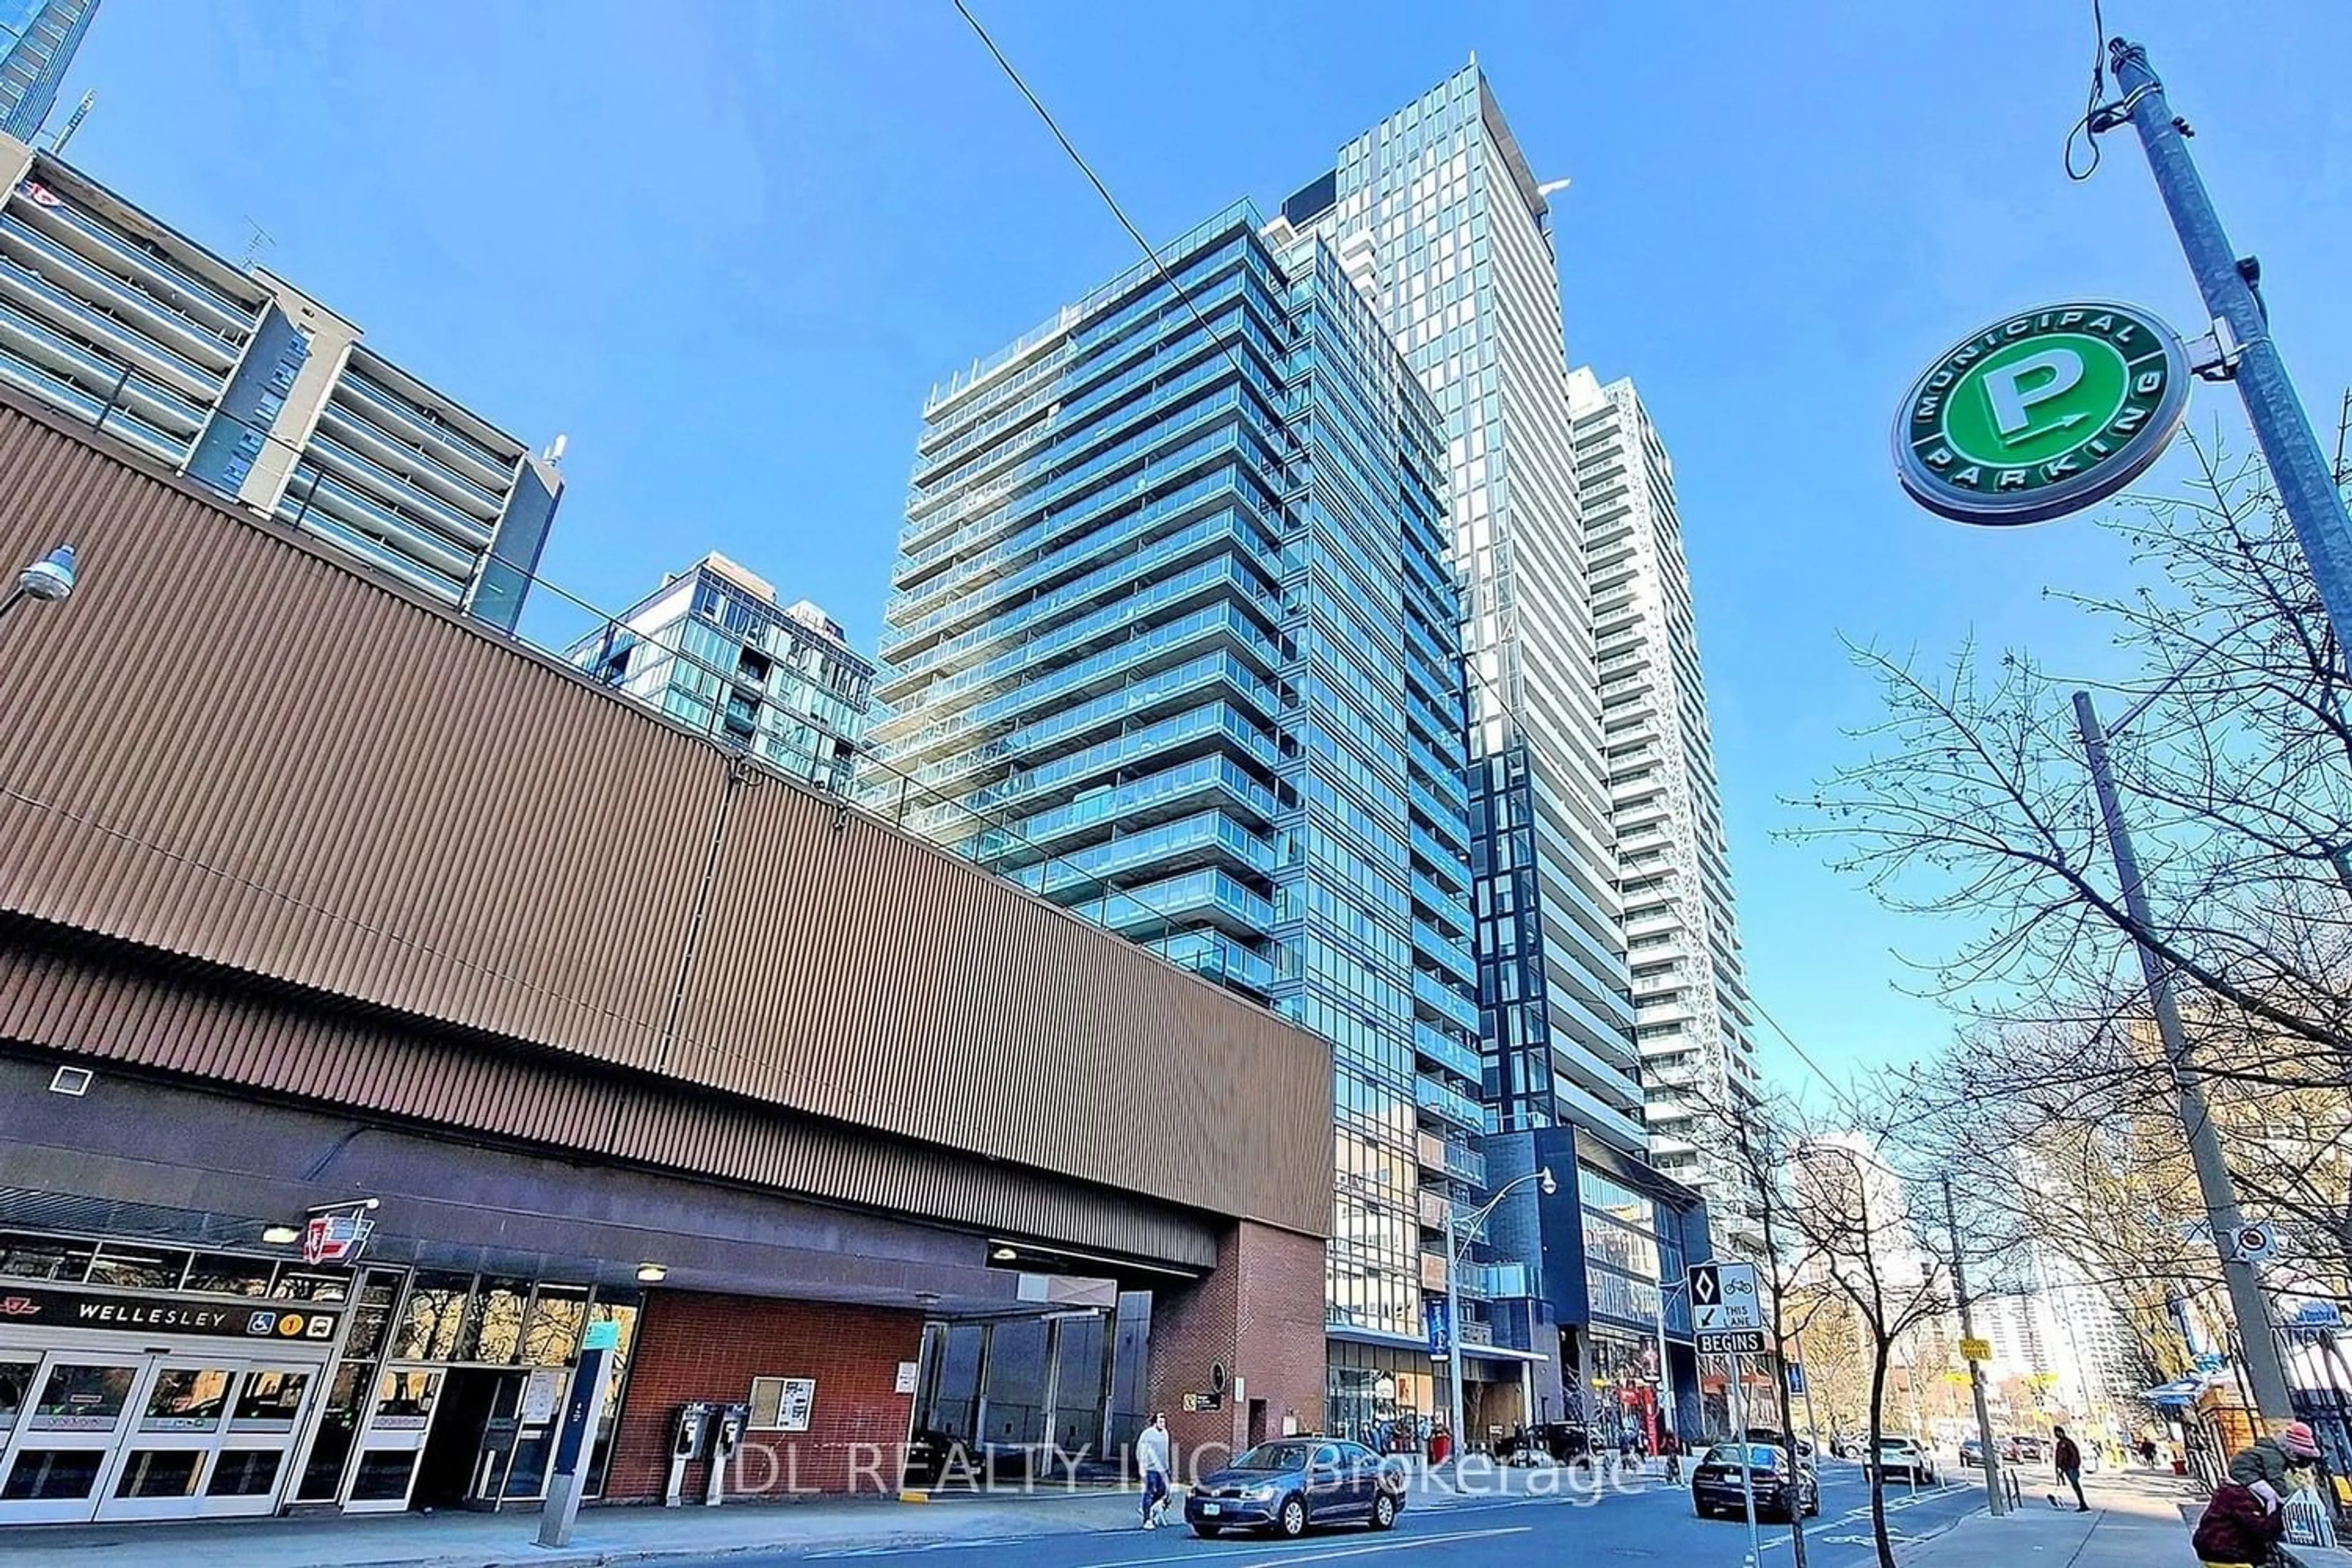 A pic from exterior of the house or condo for 28 Wellesley St #804, Toronto Ontario M4Y 1G3